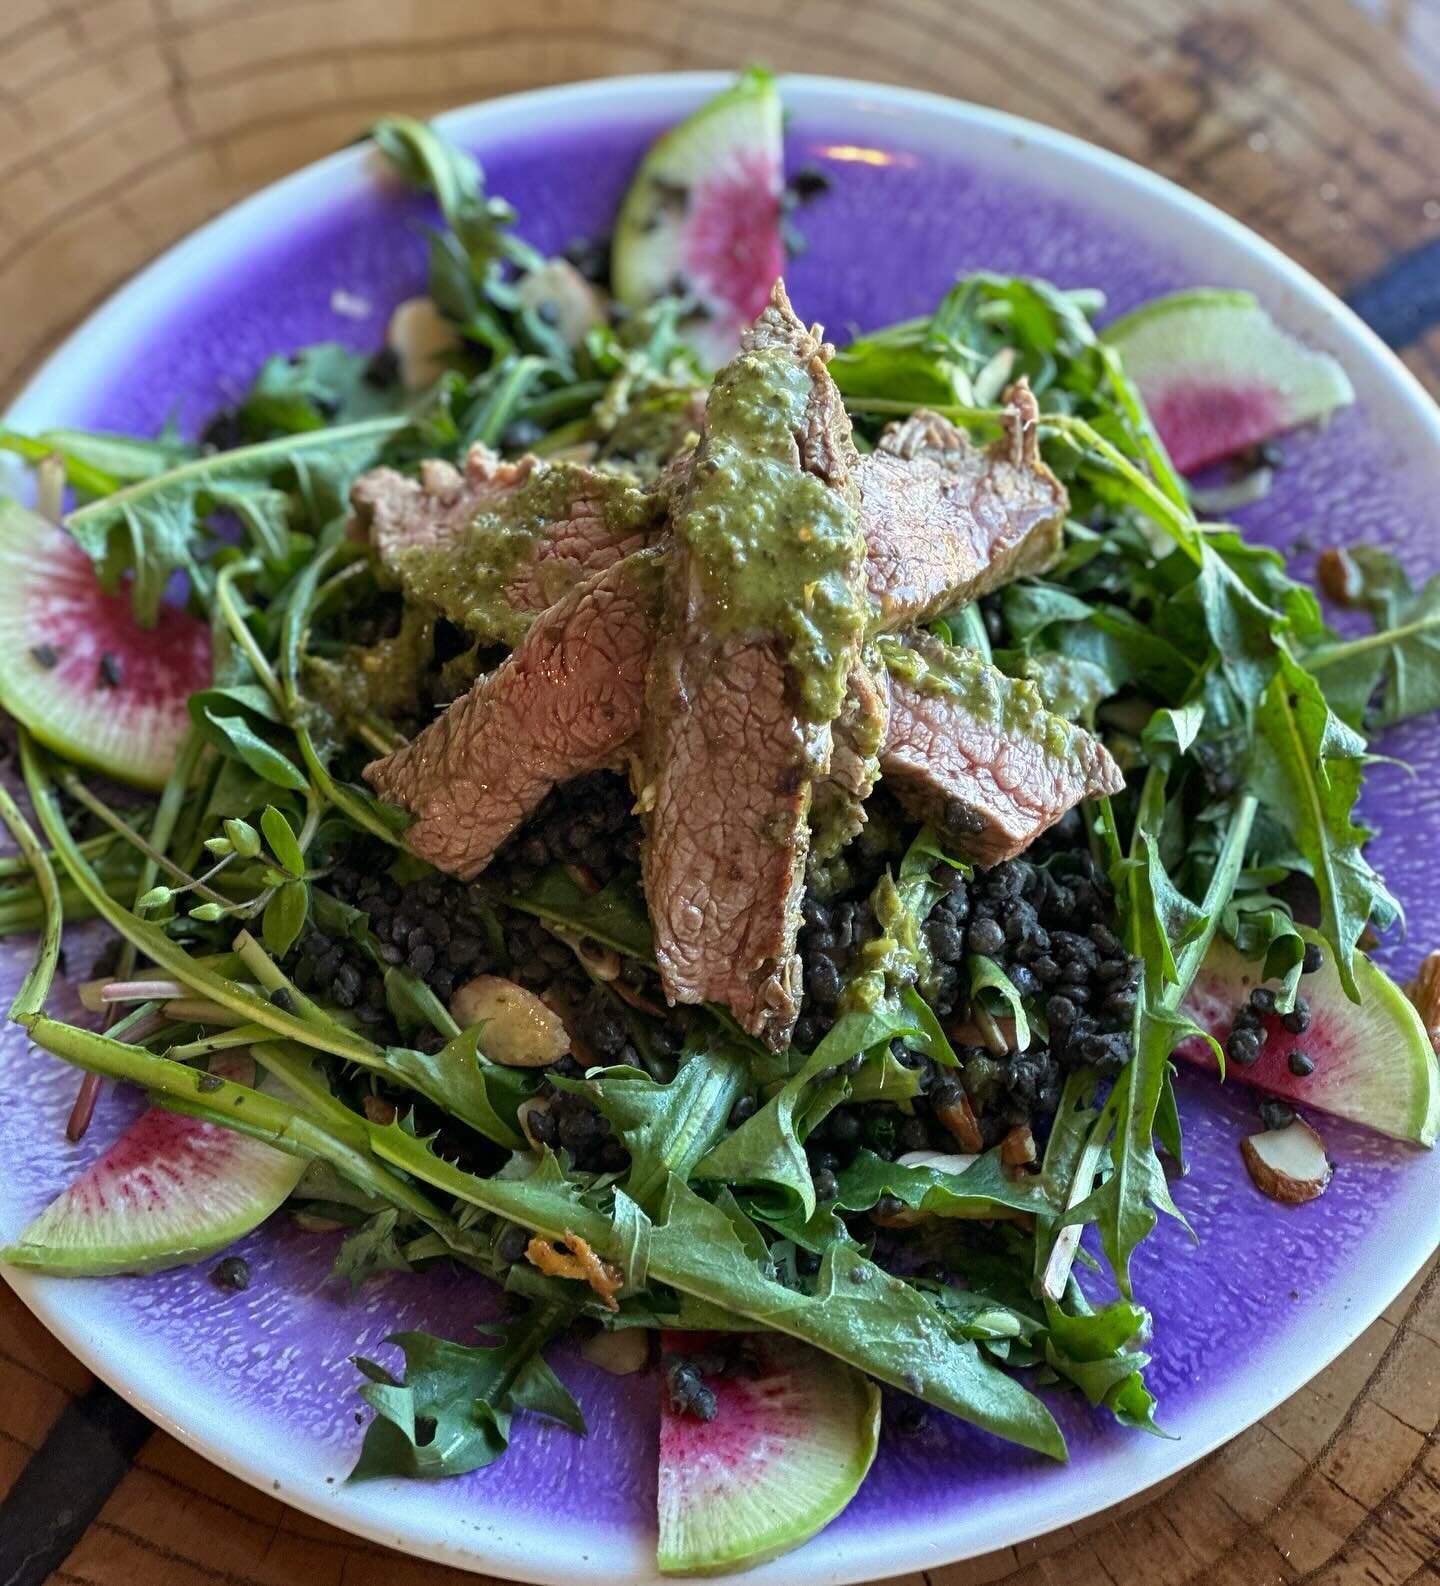 This is no joke &hellip;starting tomorrow 
NEW Seasonal Salad and April Scone Drop

First up a new Seasonal Salad will be on the menu. This salad will be created with local and seasonal produce. 

SPRING dandelion, black lentil, toasted sunflower see